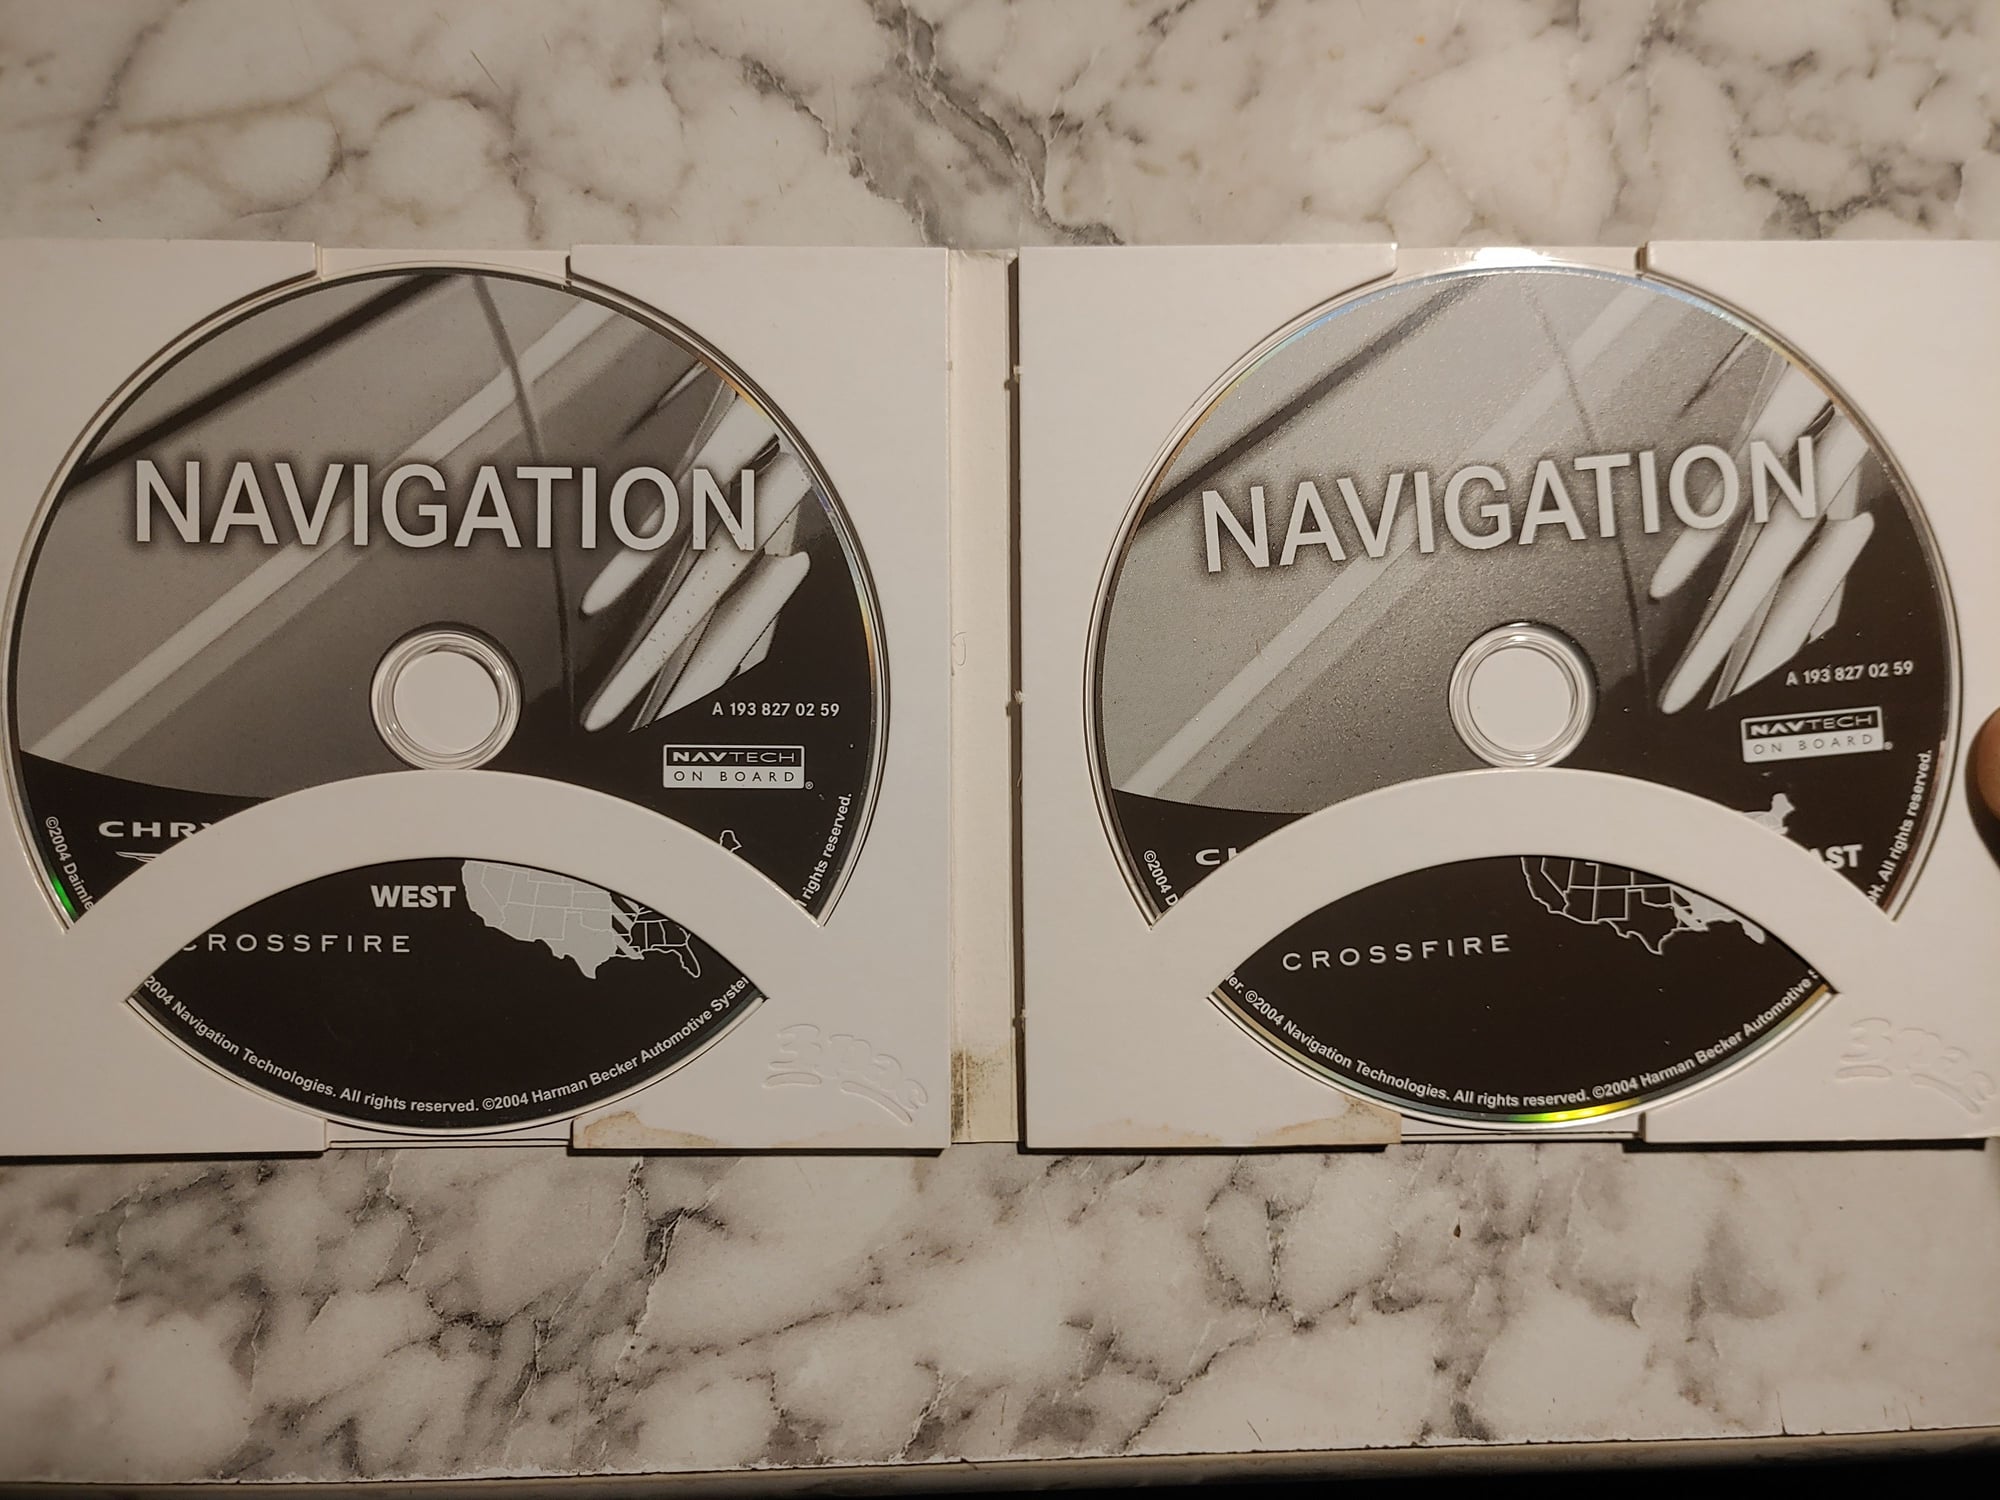 Accessories - Navigation CD's - Used - 2004 to 2007 Chrysler Crossfire - San Diego, CA 92027, United States